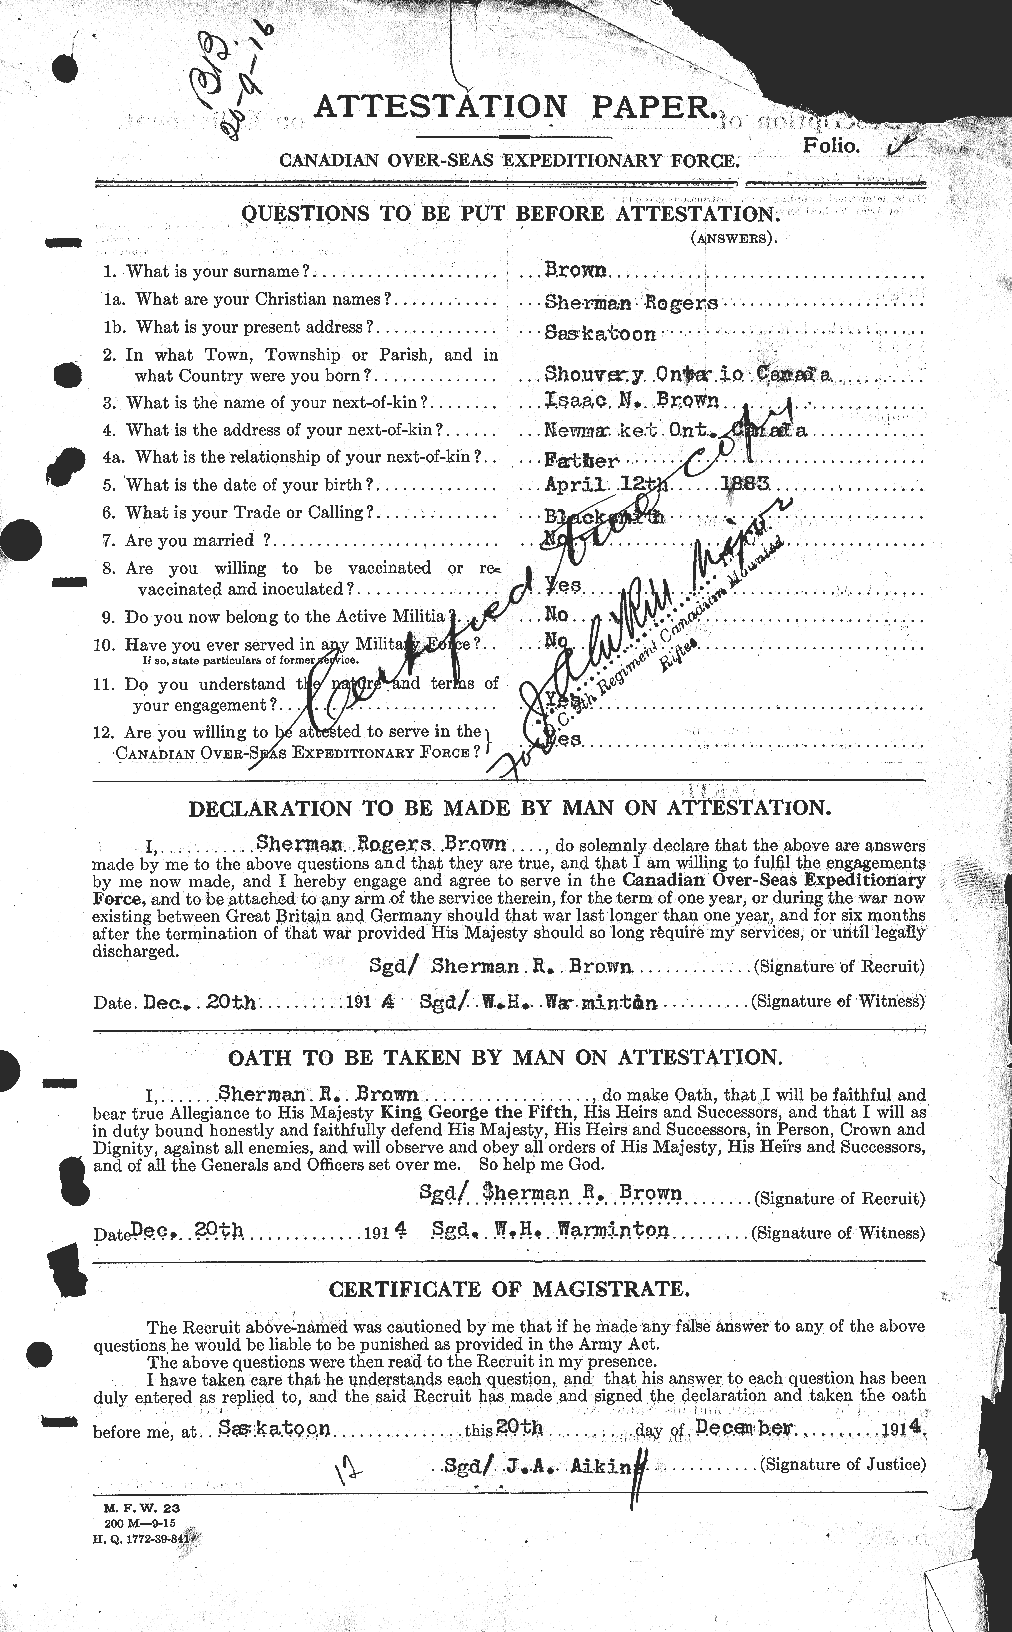 Personnel Records of the First World War - CEF 266405a